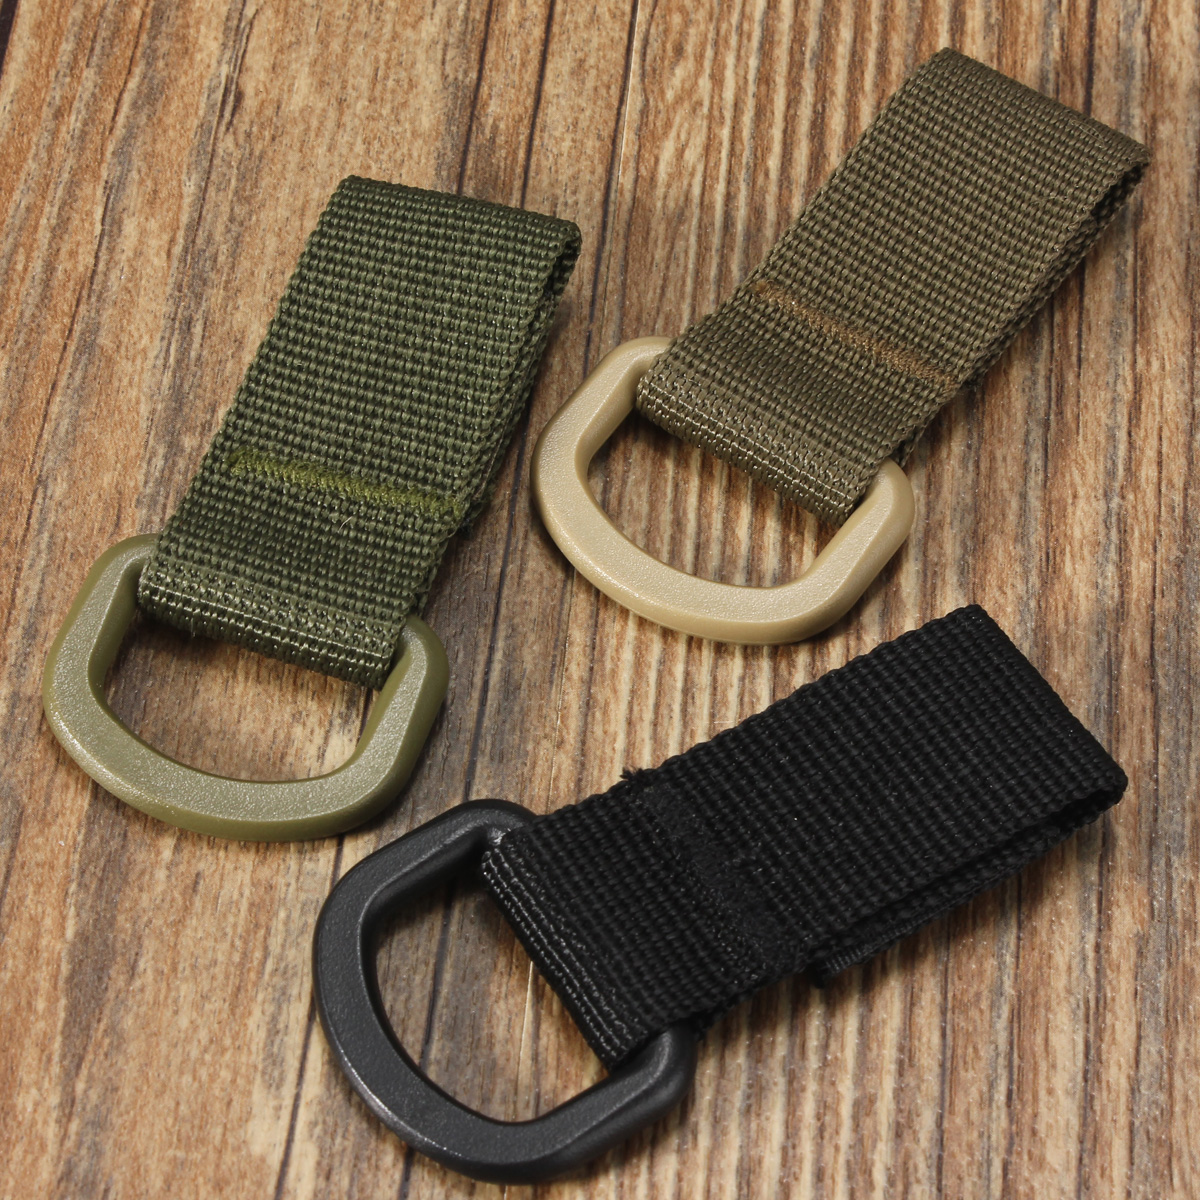 Military-Tactical-Carabiner-Nylon-Strap-Buckle-Hook-Belt-Hanging-Keychain-D-shaped-Ring-Molle-System-1028668-9